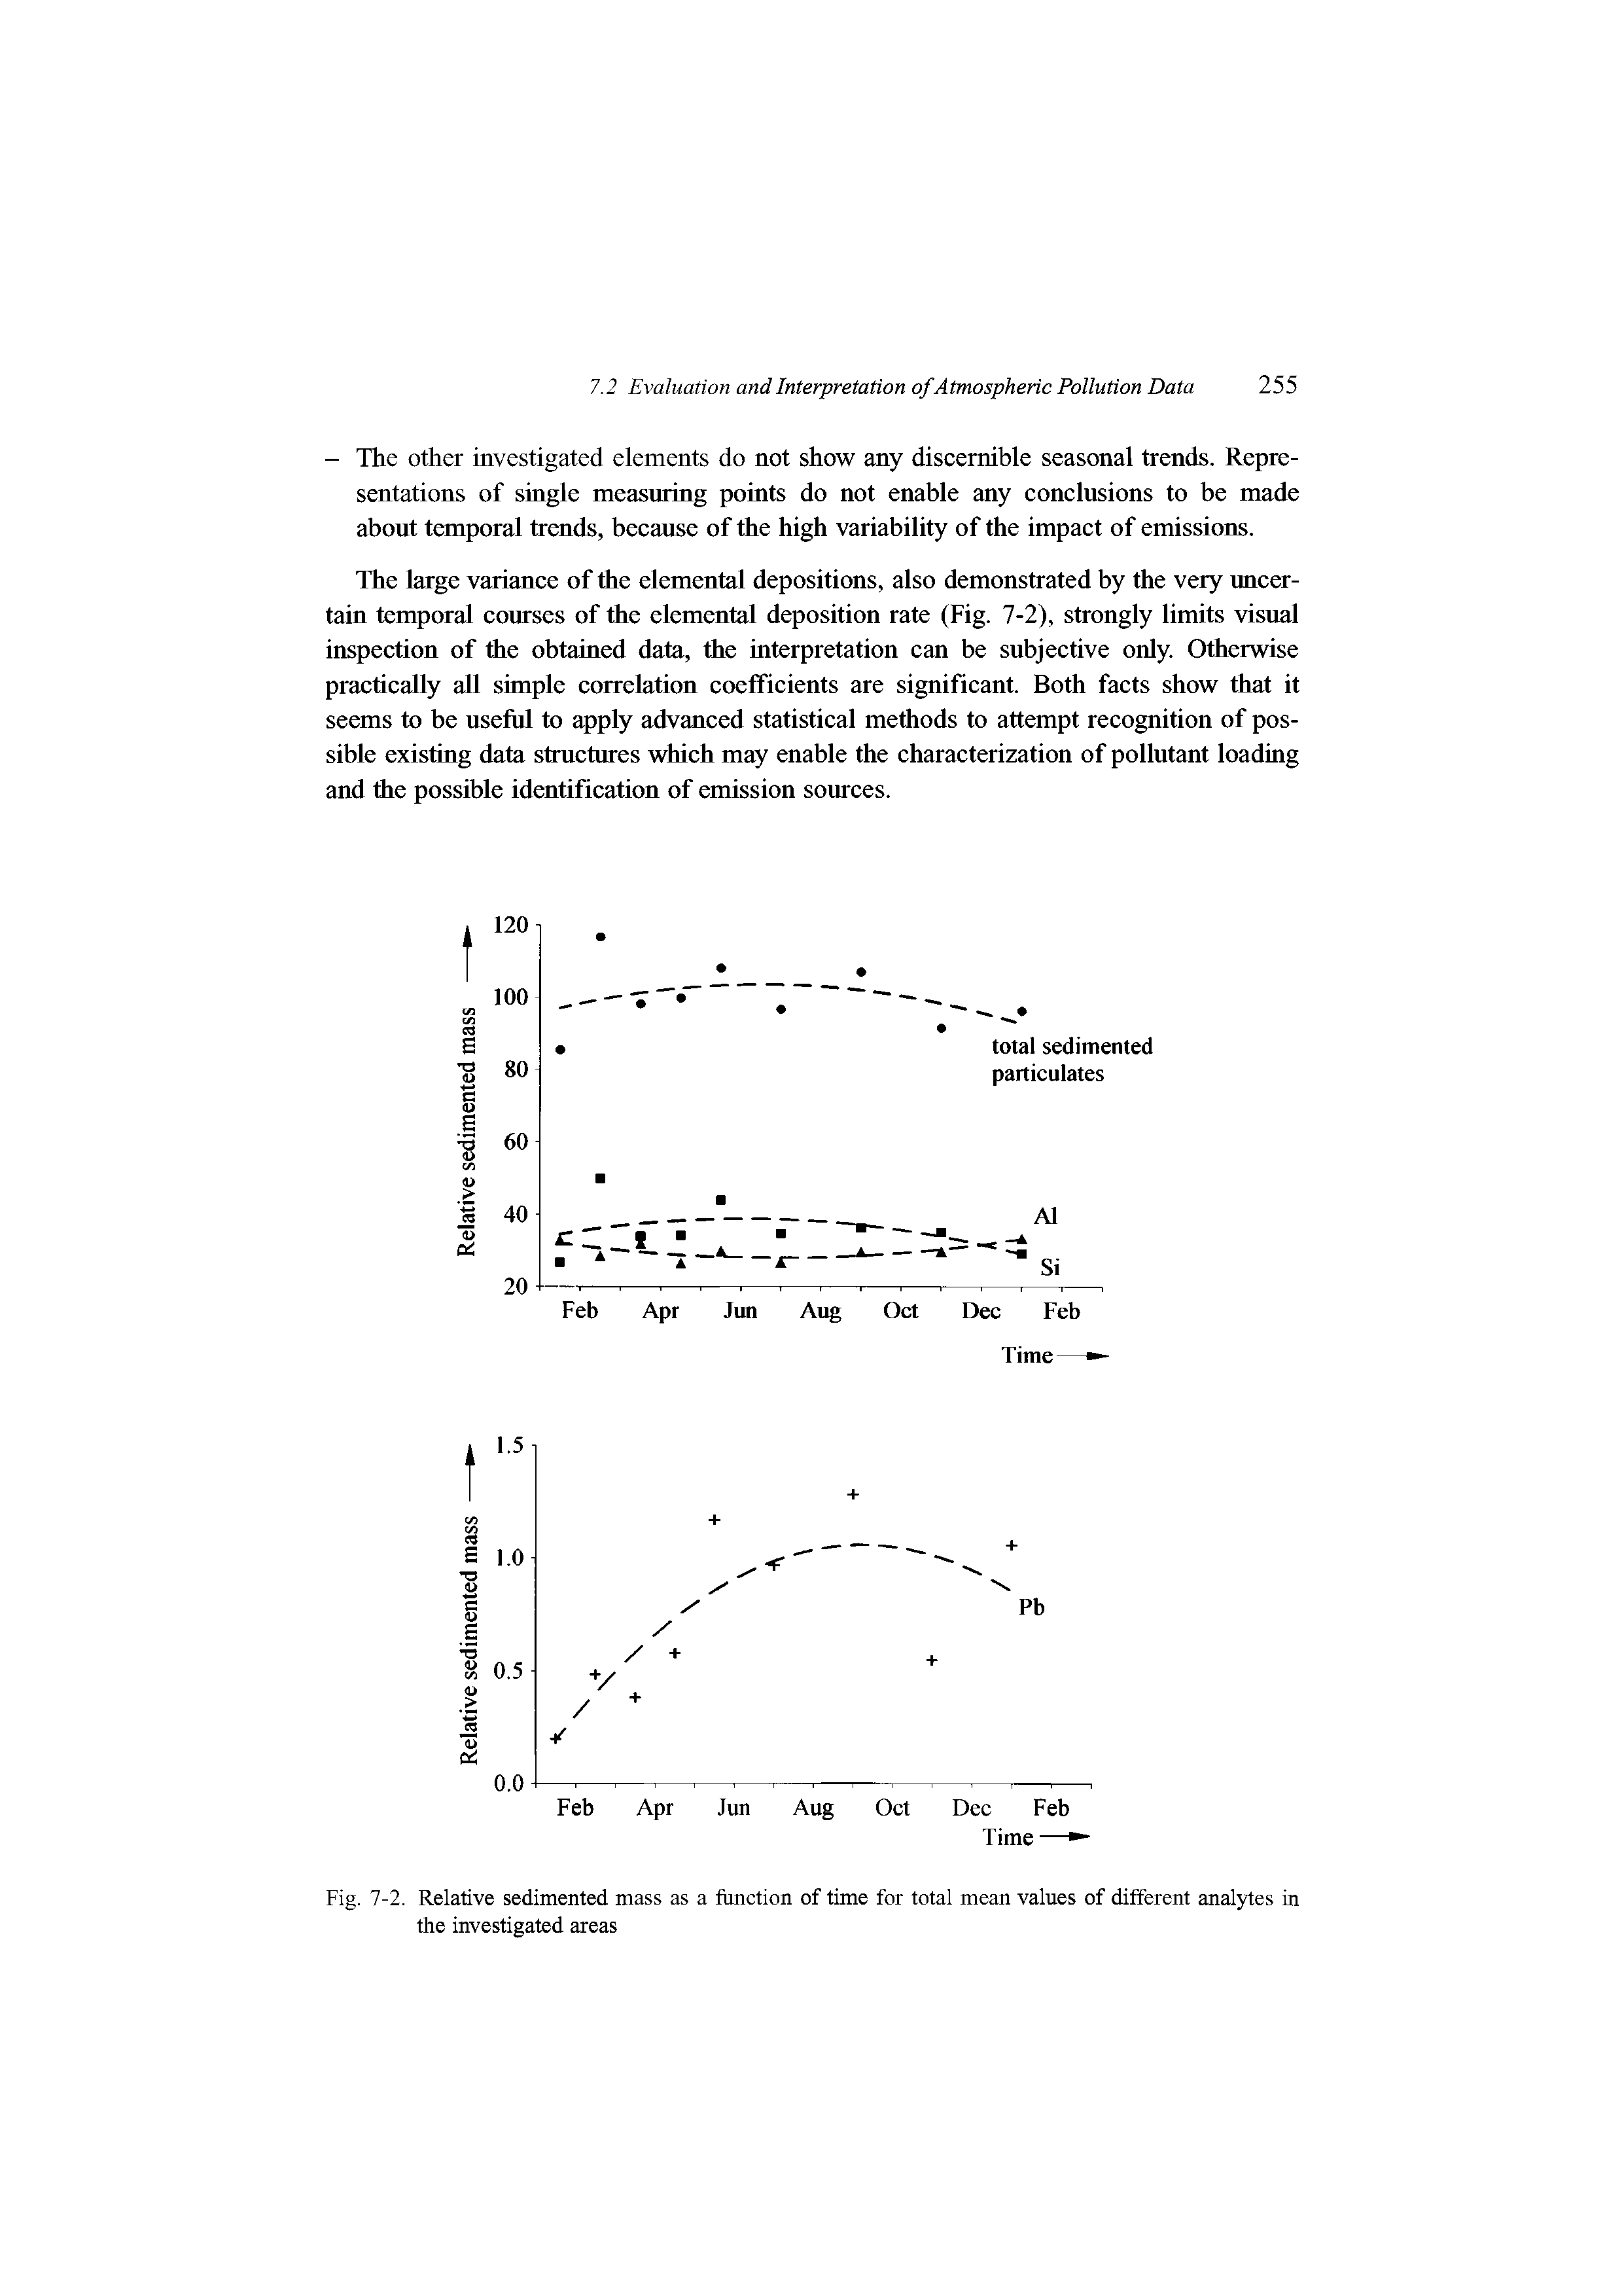 Fig. 7-2. Relative sedimented mass as a function of time for total mean values of different analytes in the investigated areas...